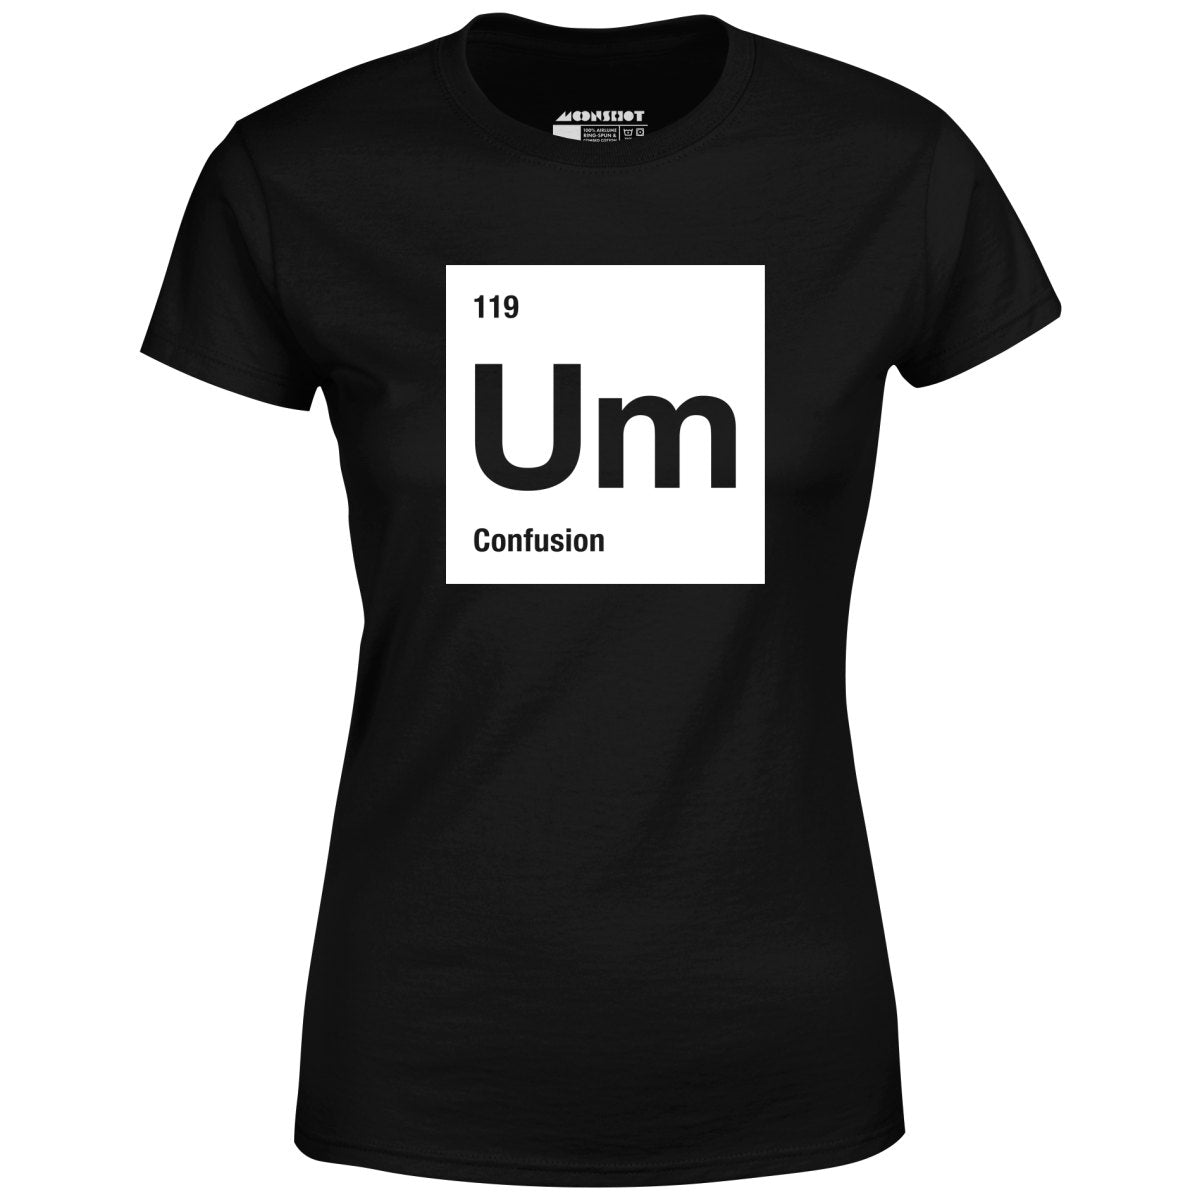 Um - The Element of Confusion - Women's T-Shirt